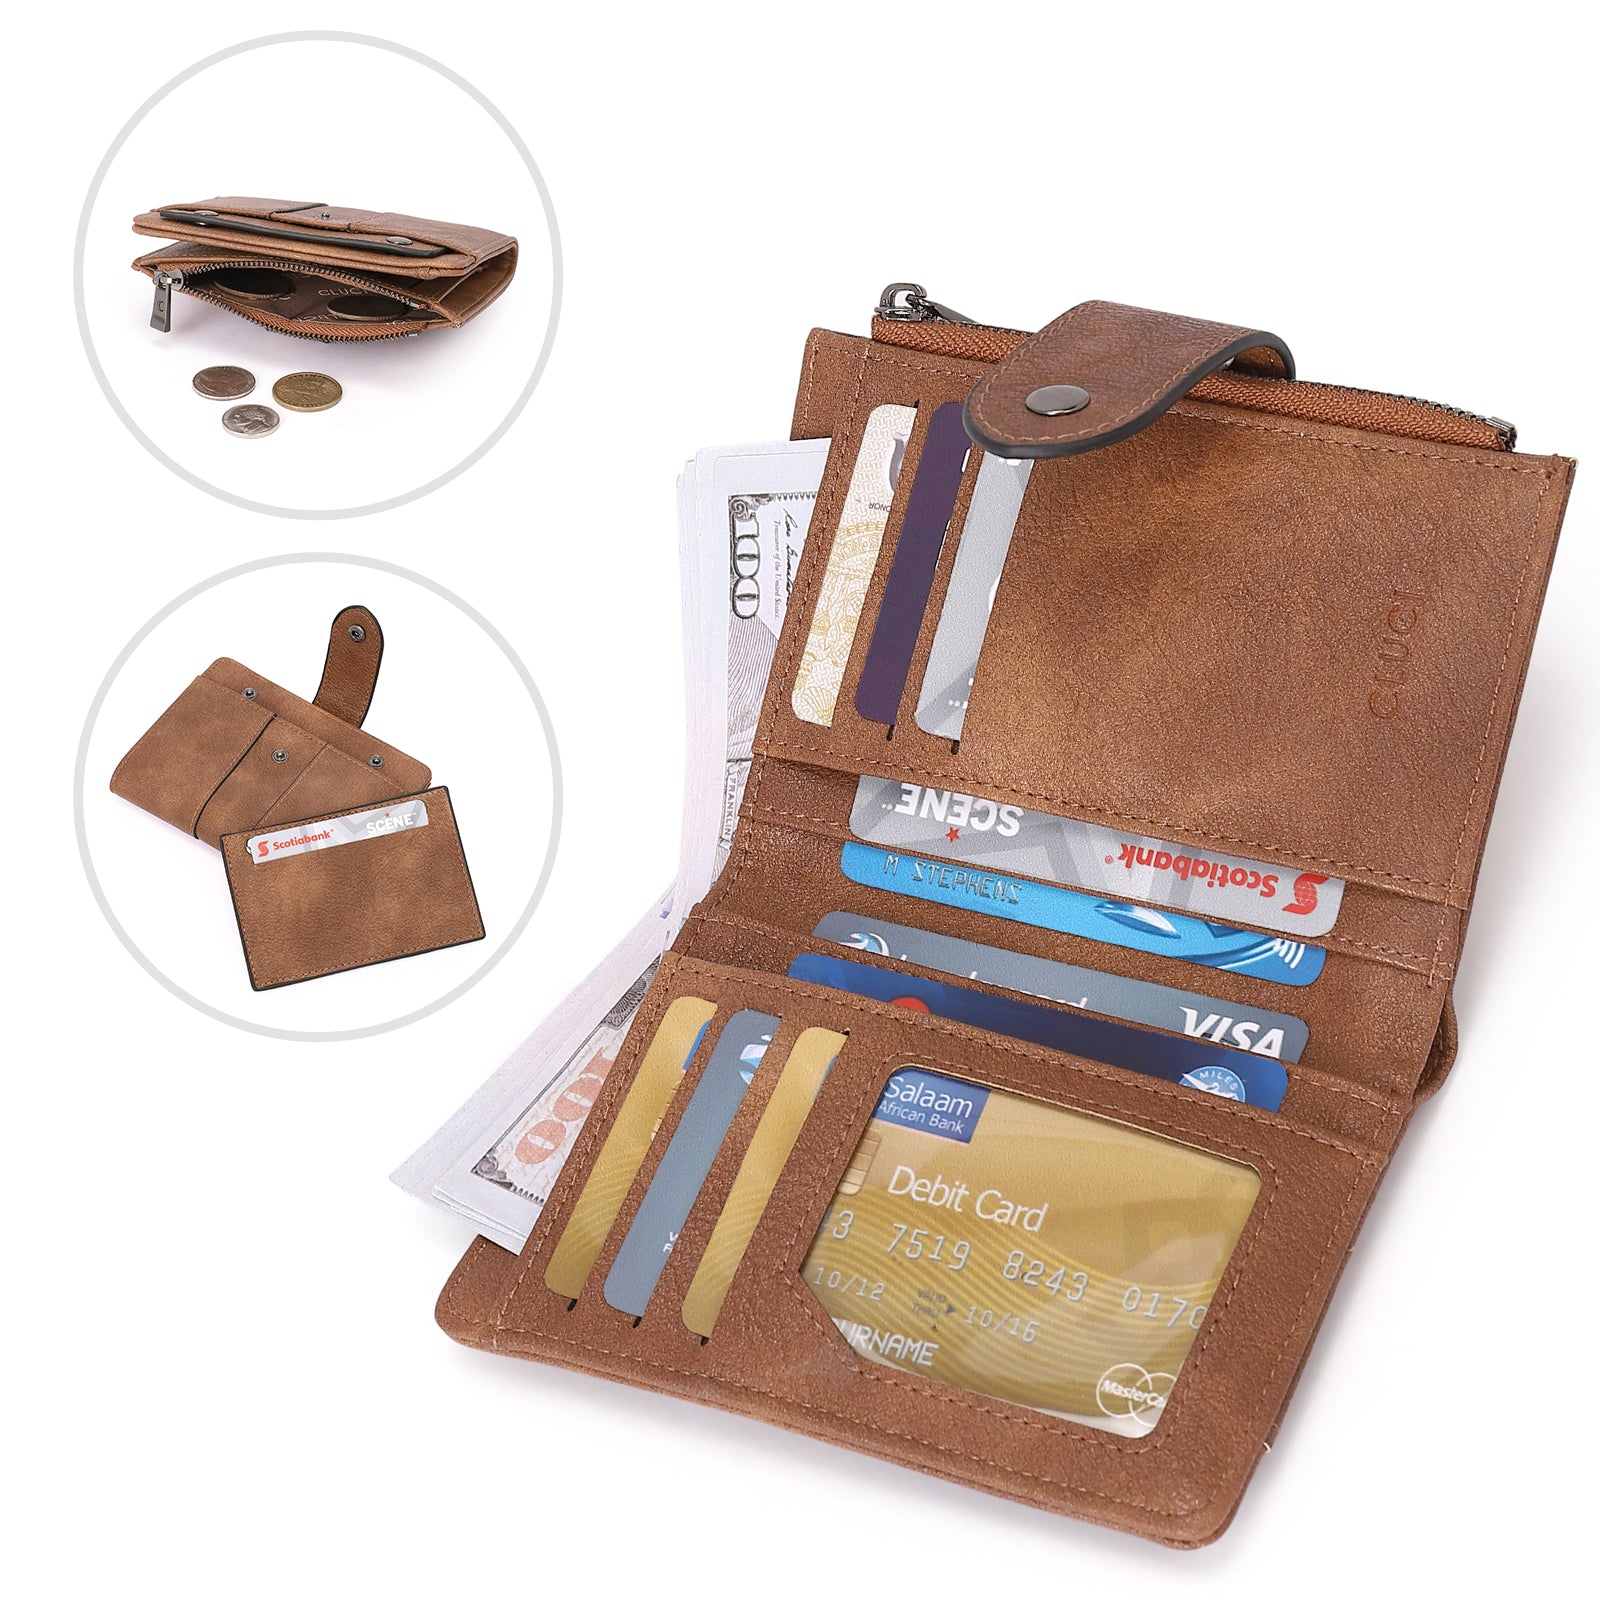 Men's Bifold Wallet with Removable Credit Card/ID Sleeve